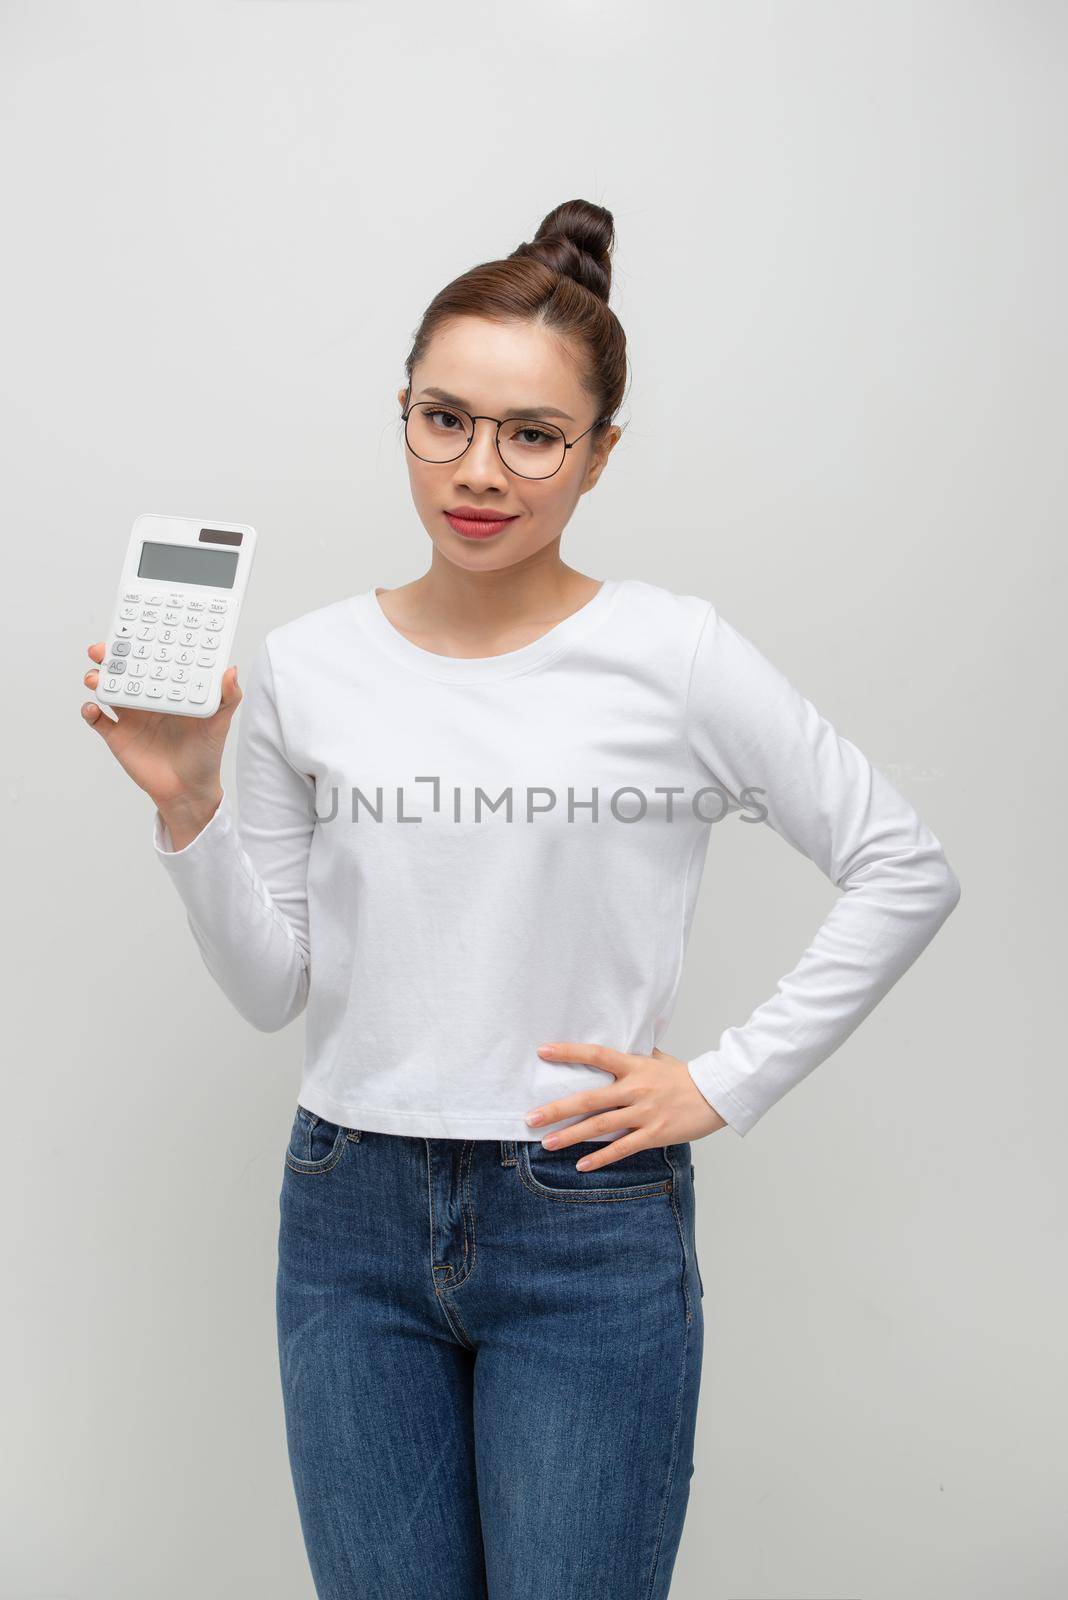 Dissatisfied young business woman in white shirt posing isolated on white background  by makidotvn